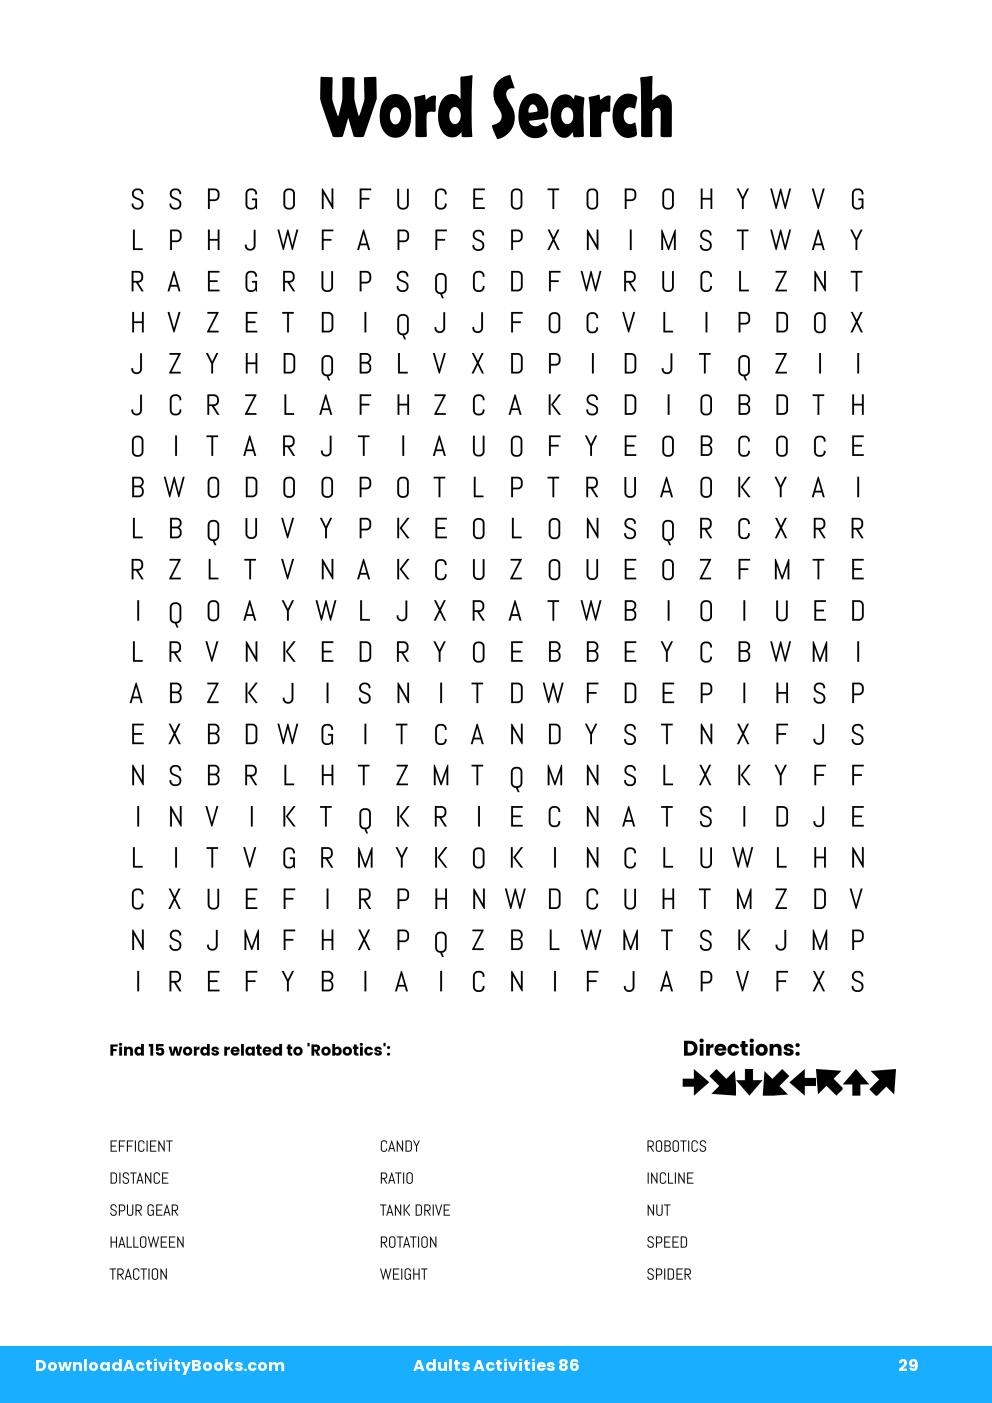 Word Search in Adults Activities 86